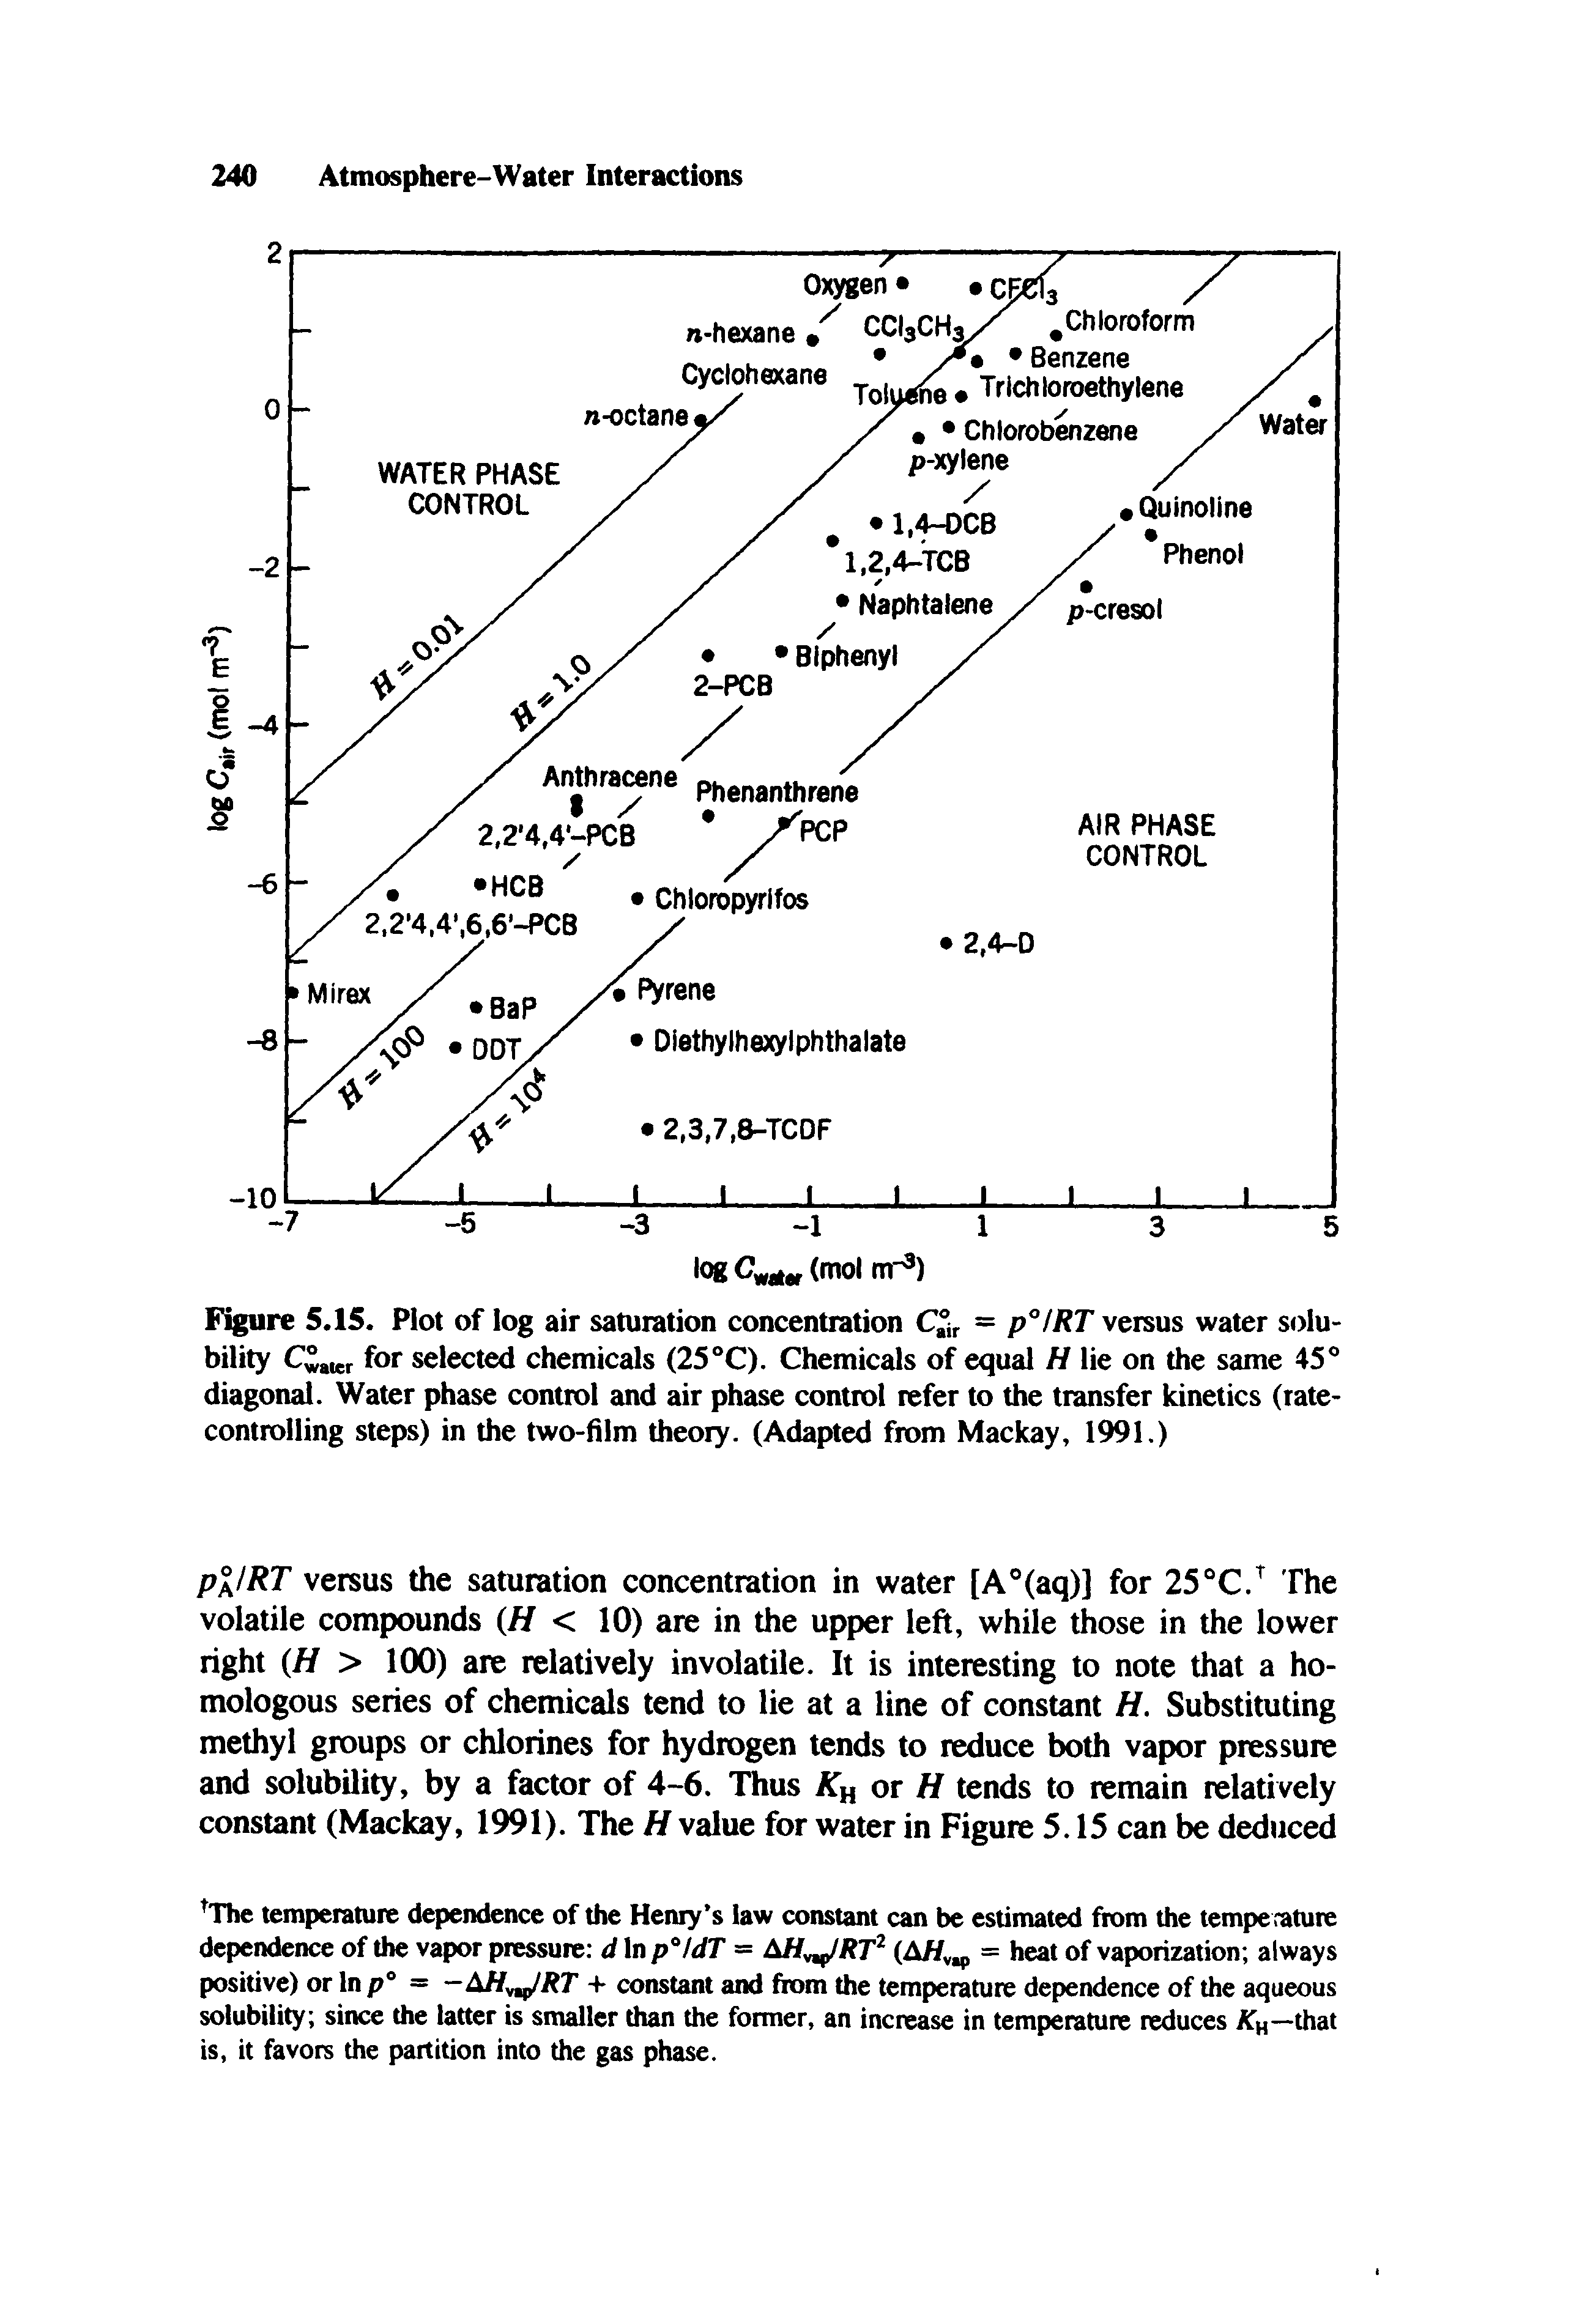 Figure 5.15. Plot of log air saturation concentration = p°/RT versus water solubility C°ater for selected chemicals (25 °C). Chemicals of equal H lie on the same 45° diagonal. Water phase control and air phase control refer to the transfer kinetics (rate-controlling steps) in the two-film theory. (Adapted from Mackay, 1991.)...